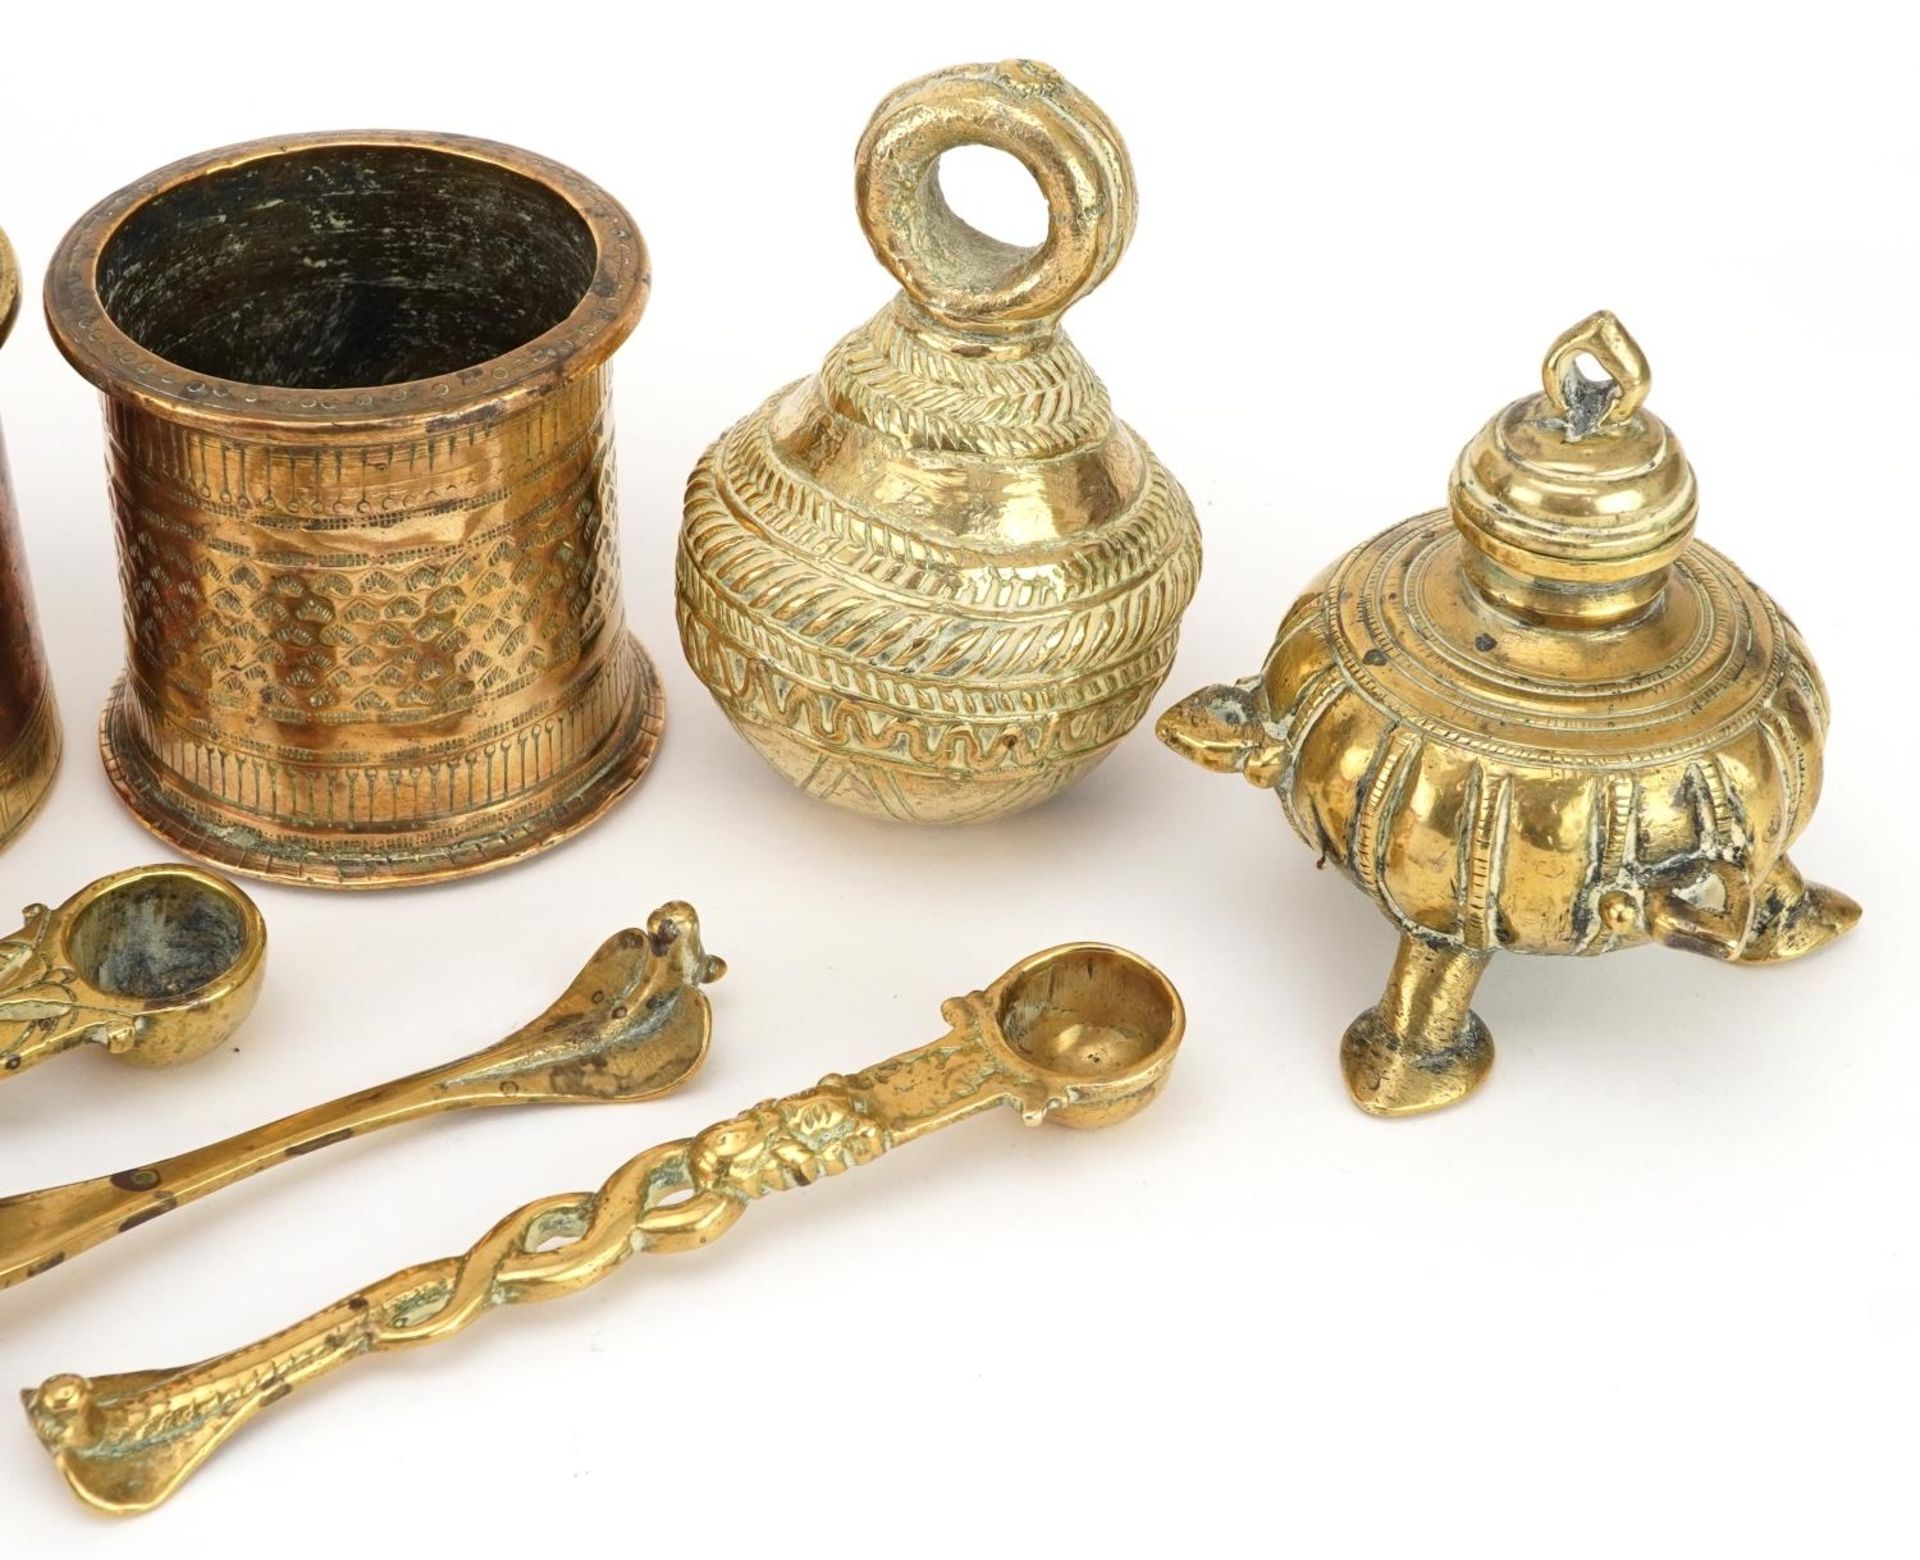 18th/19th and 20th century Indian metalware including three anointing spoons, Panch Patra holy water - Image 3 of 3